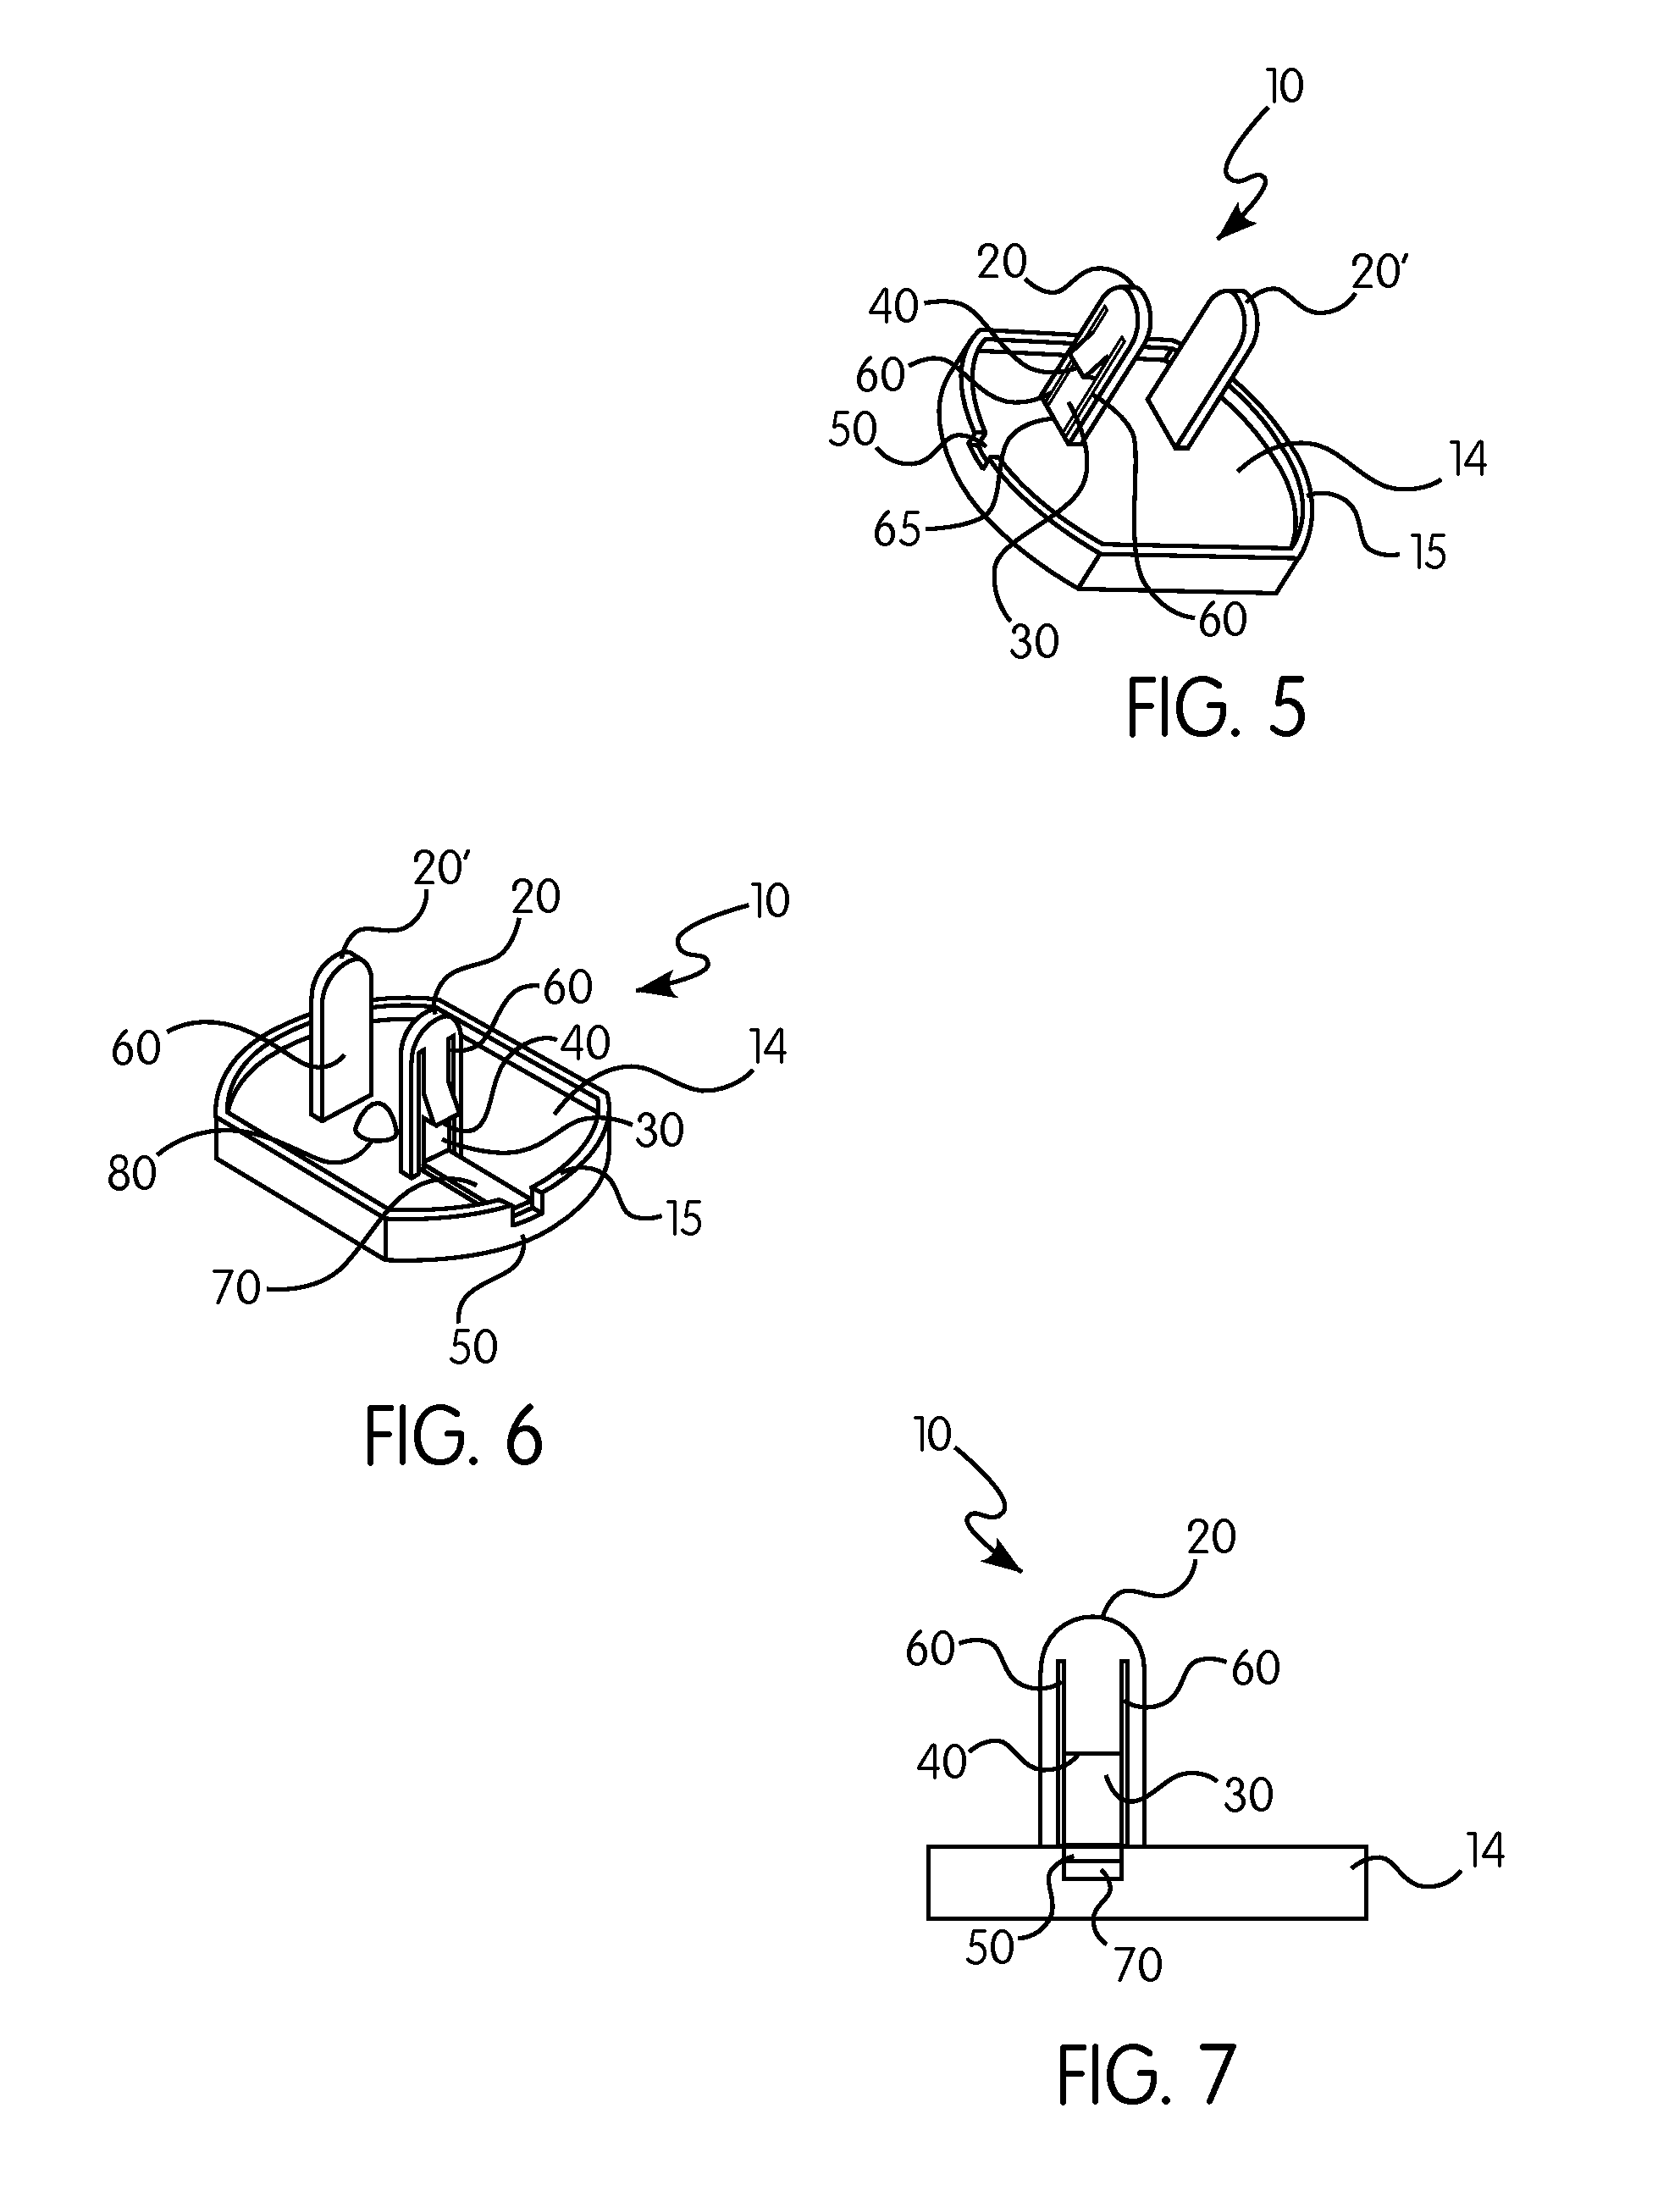 Protective electrical outlet cover having integrated positive locking mechanism